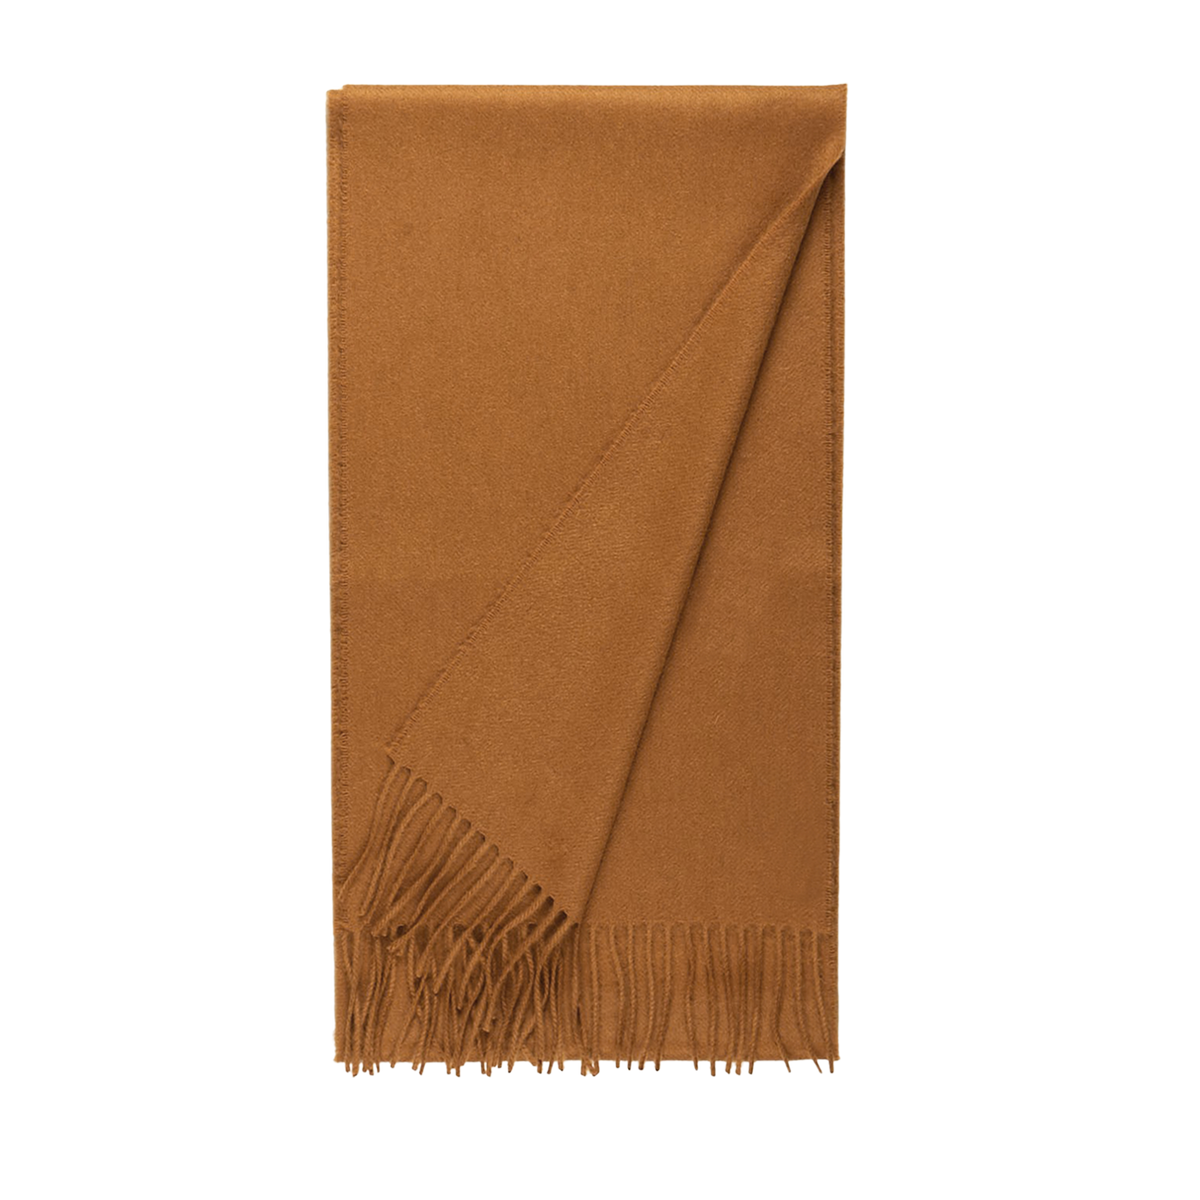 Johnstons of Elgin Camel Beige Cashmere Scarf Feature2